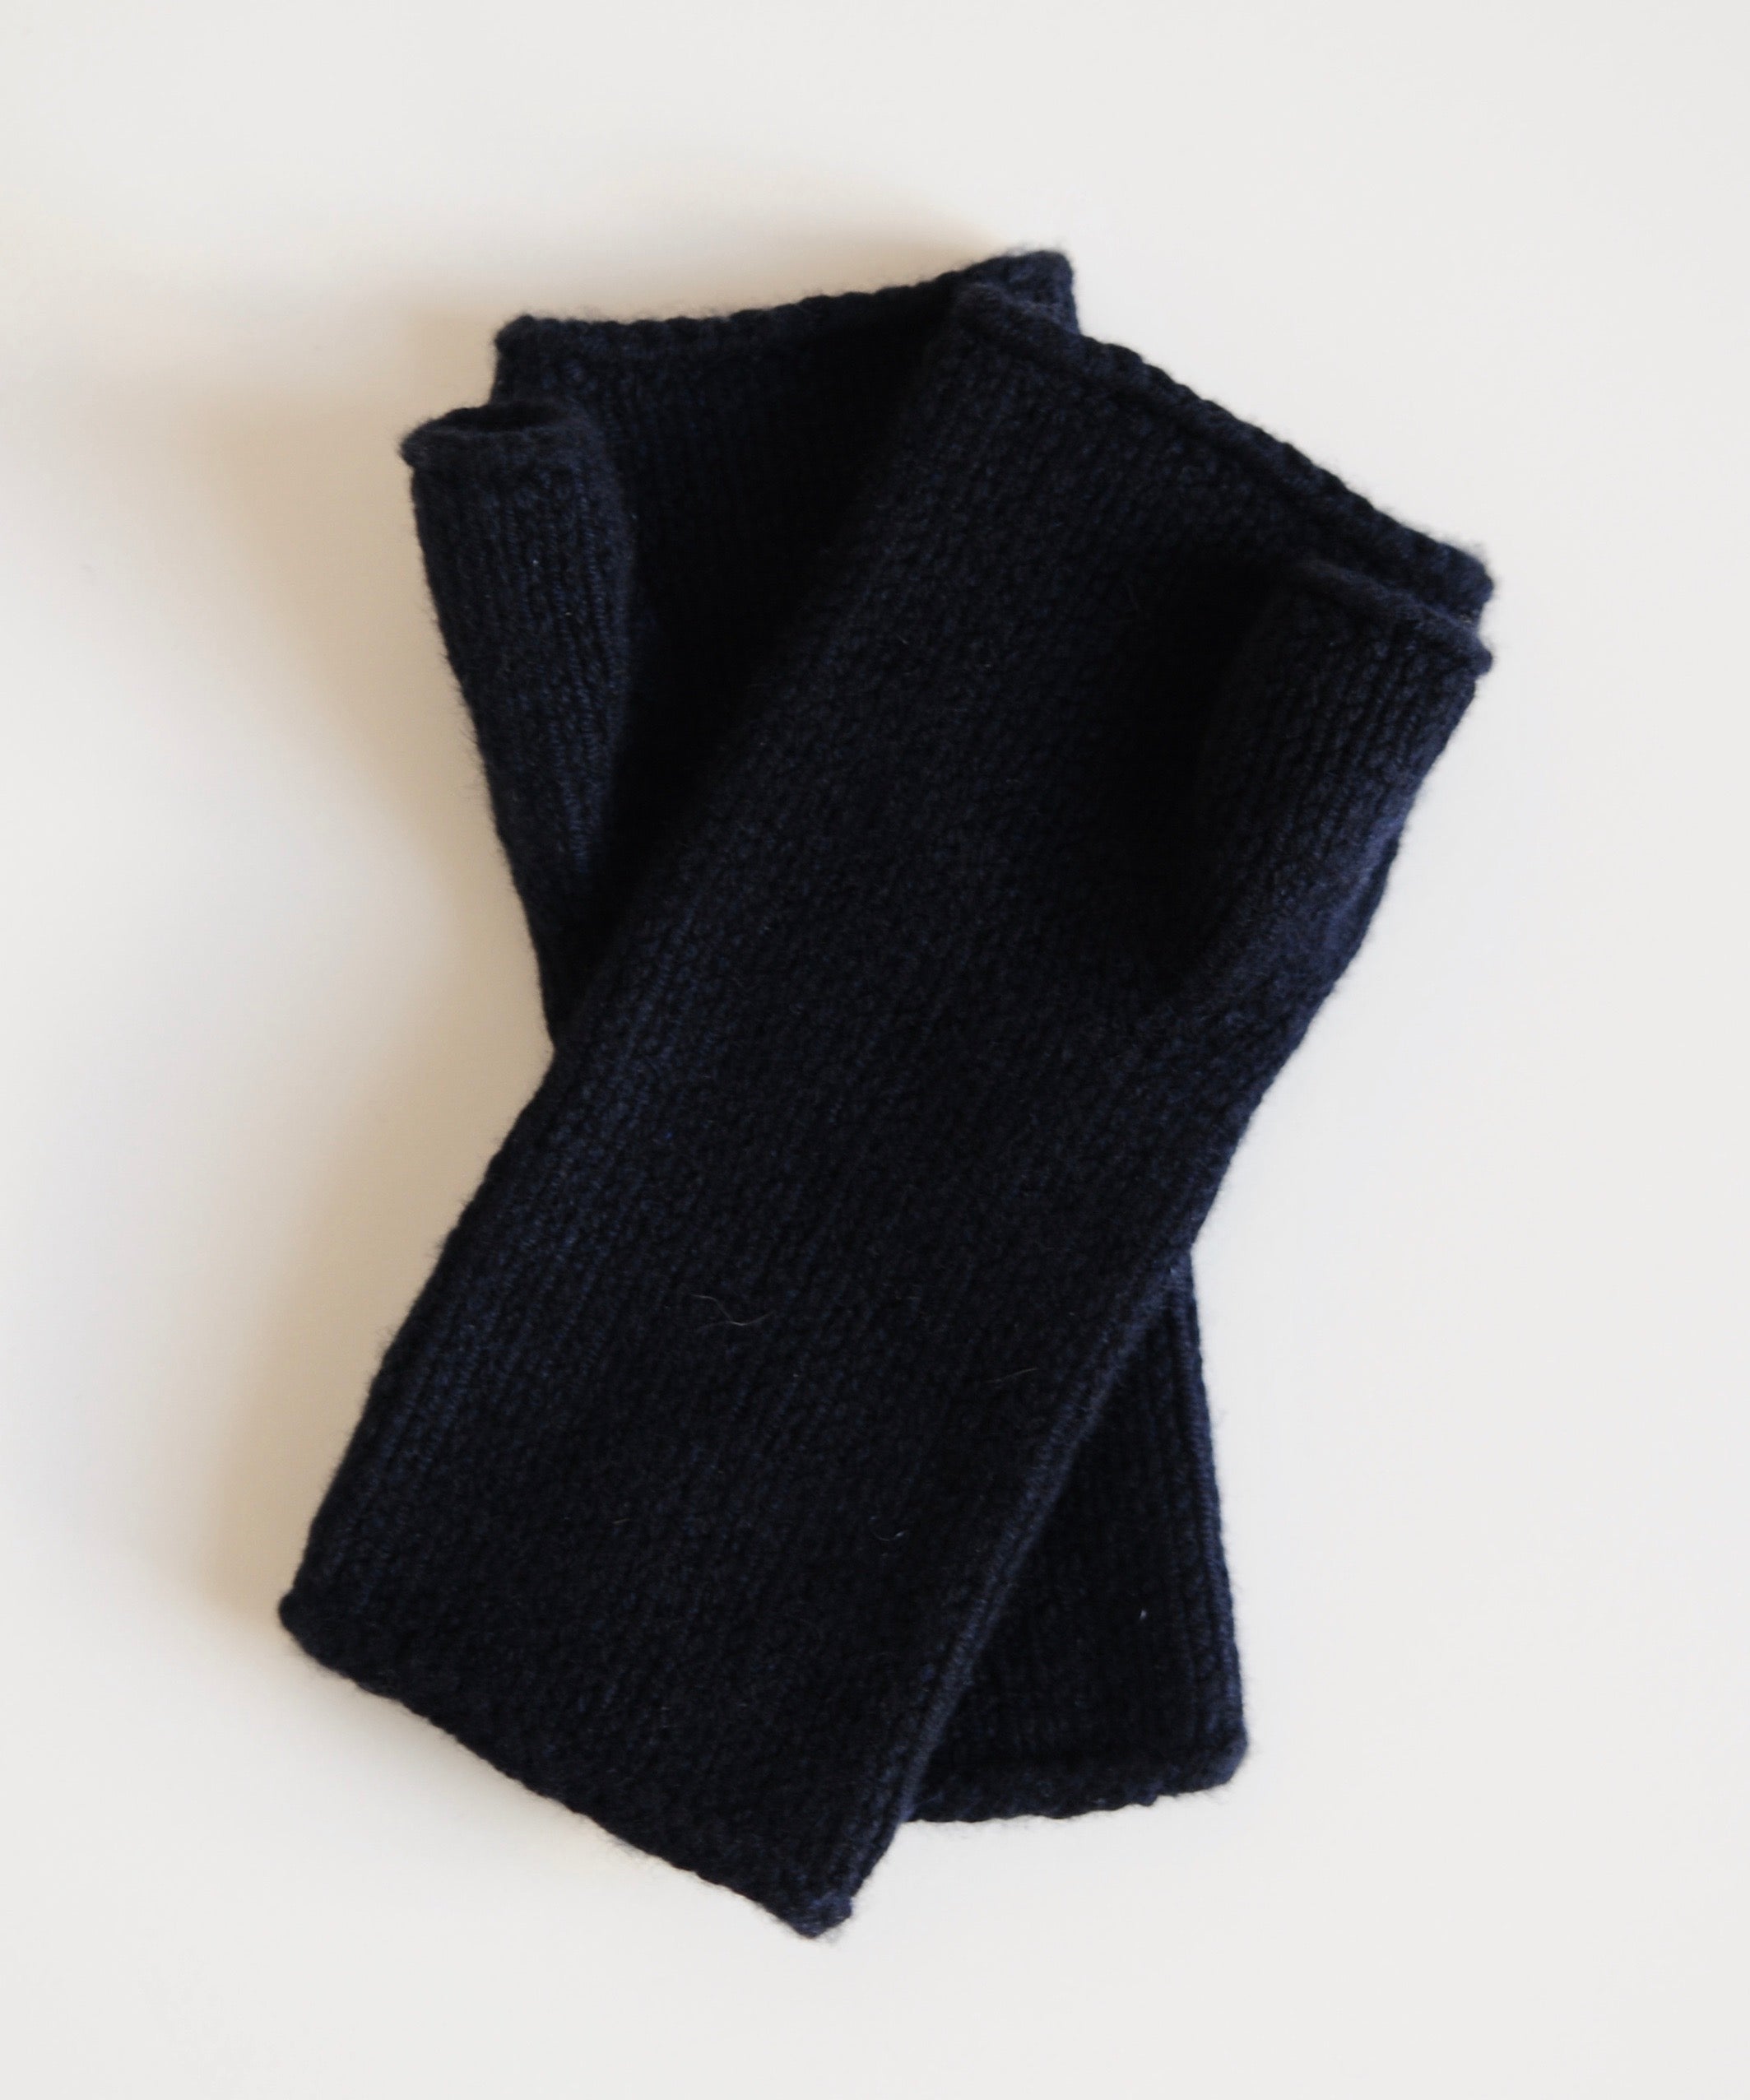 recycled-cashmere-midnight-hand-knitted-fingerless-gloves